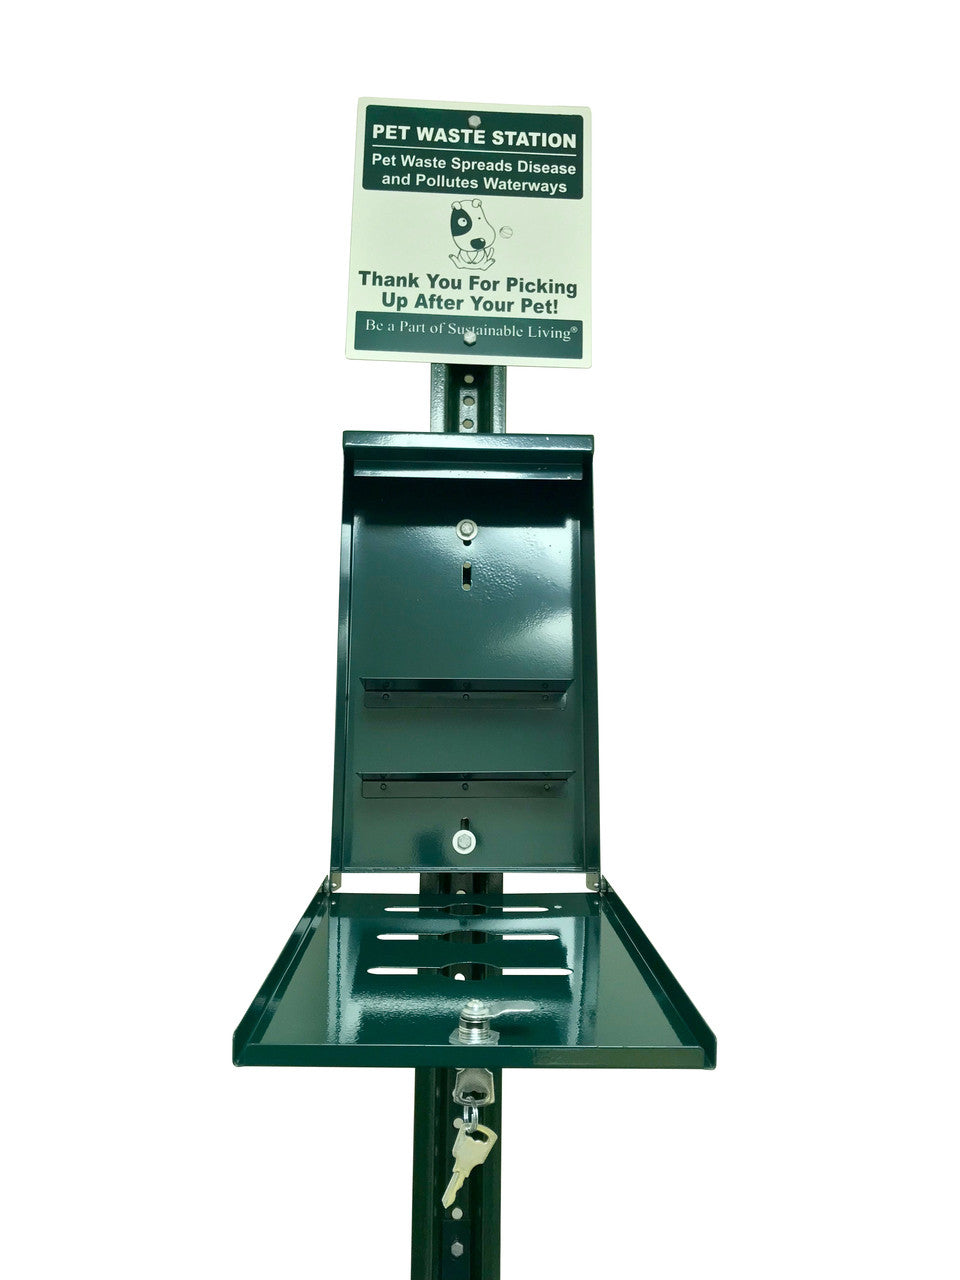 Poop bags dispenser has a slanted roof to keep rain water from getting in and making bags wet.

Locking hatch and includes two keys

Holds up to four rolls (800 bags) with three openings for easy access to three separate rolls (600 bags)

Powder coated aluminum for rust free use in all weather
